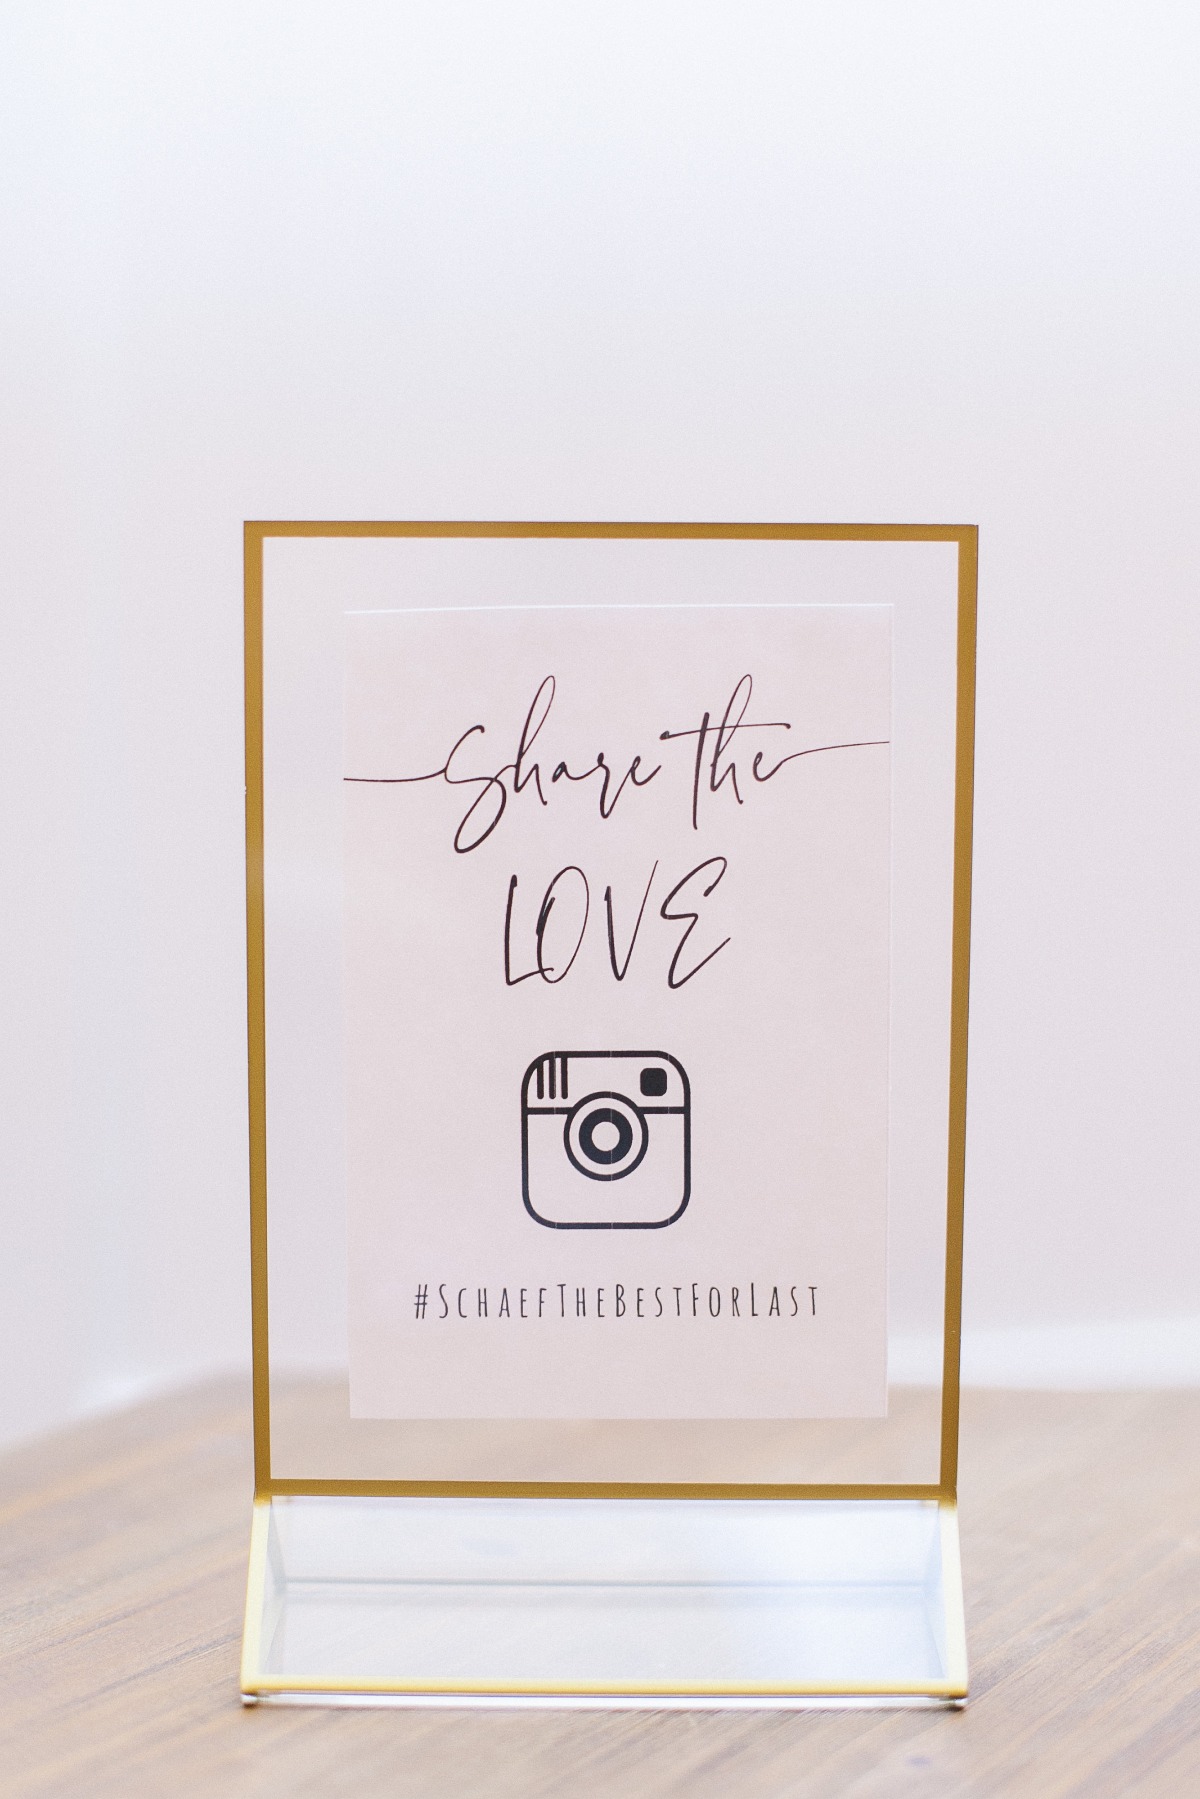 Instagram hash tag in gold frame